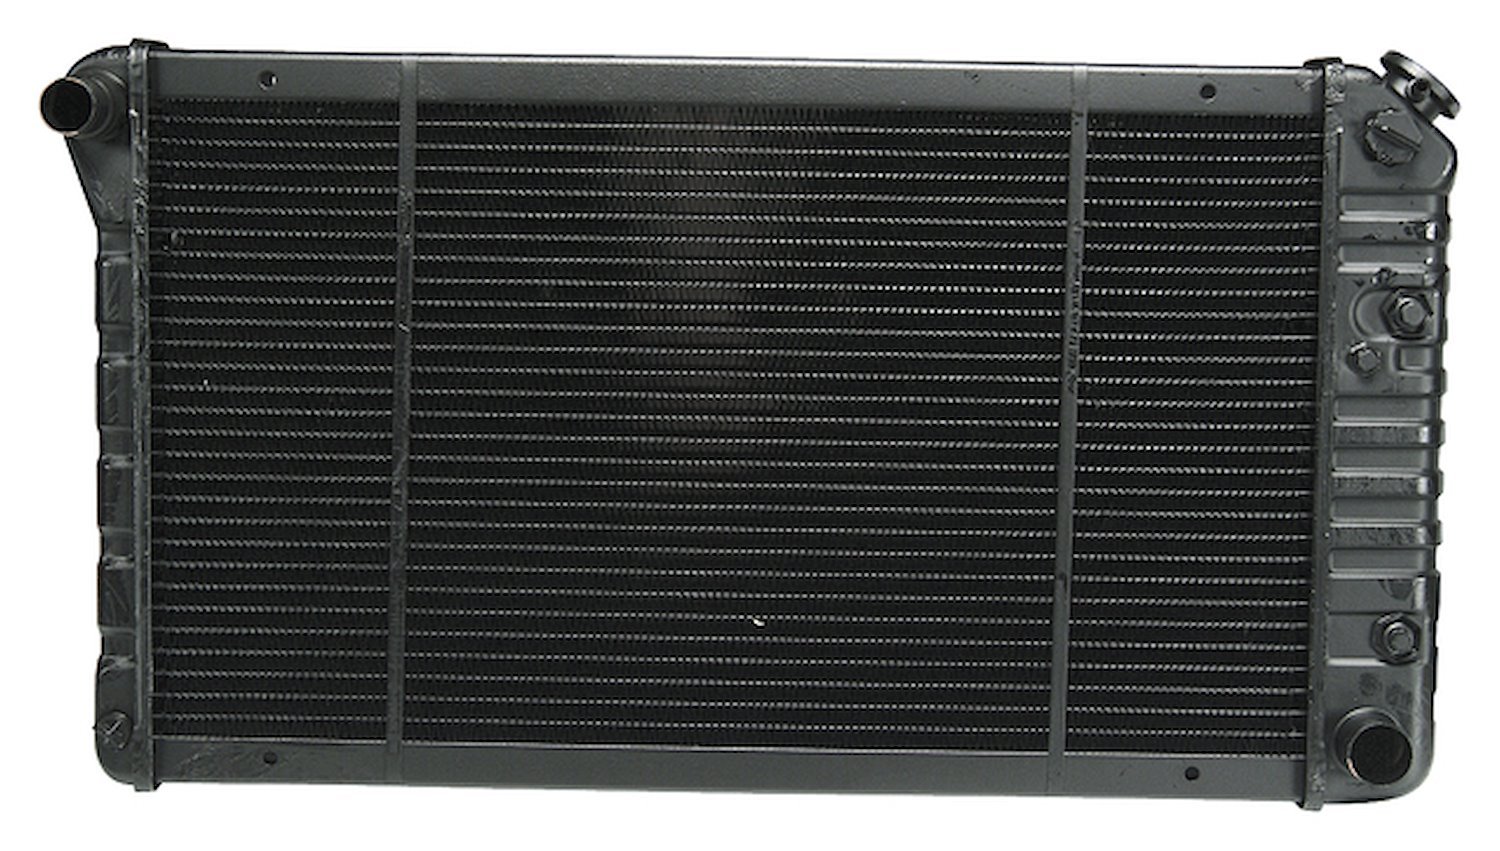 Replacement Radiator Fits Select 1971-1976 Buick, Chevrolet, Pontiac Models & 1975-1986 Chevrolet C10 Truck [3-Row]